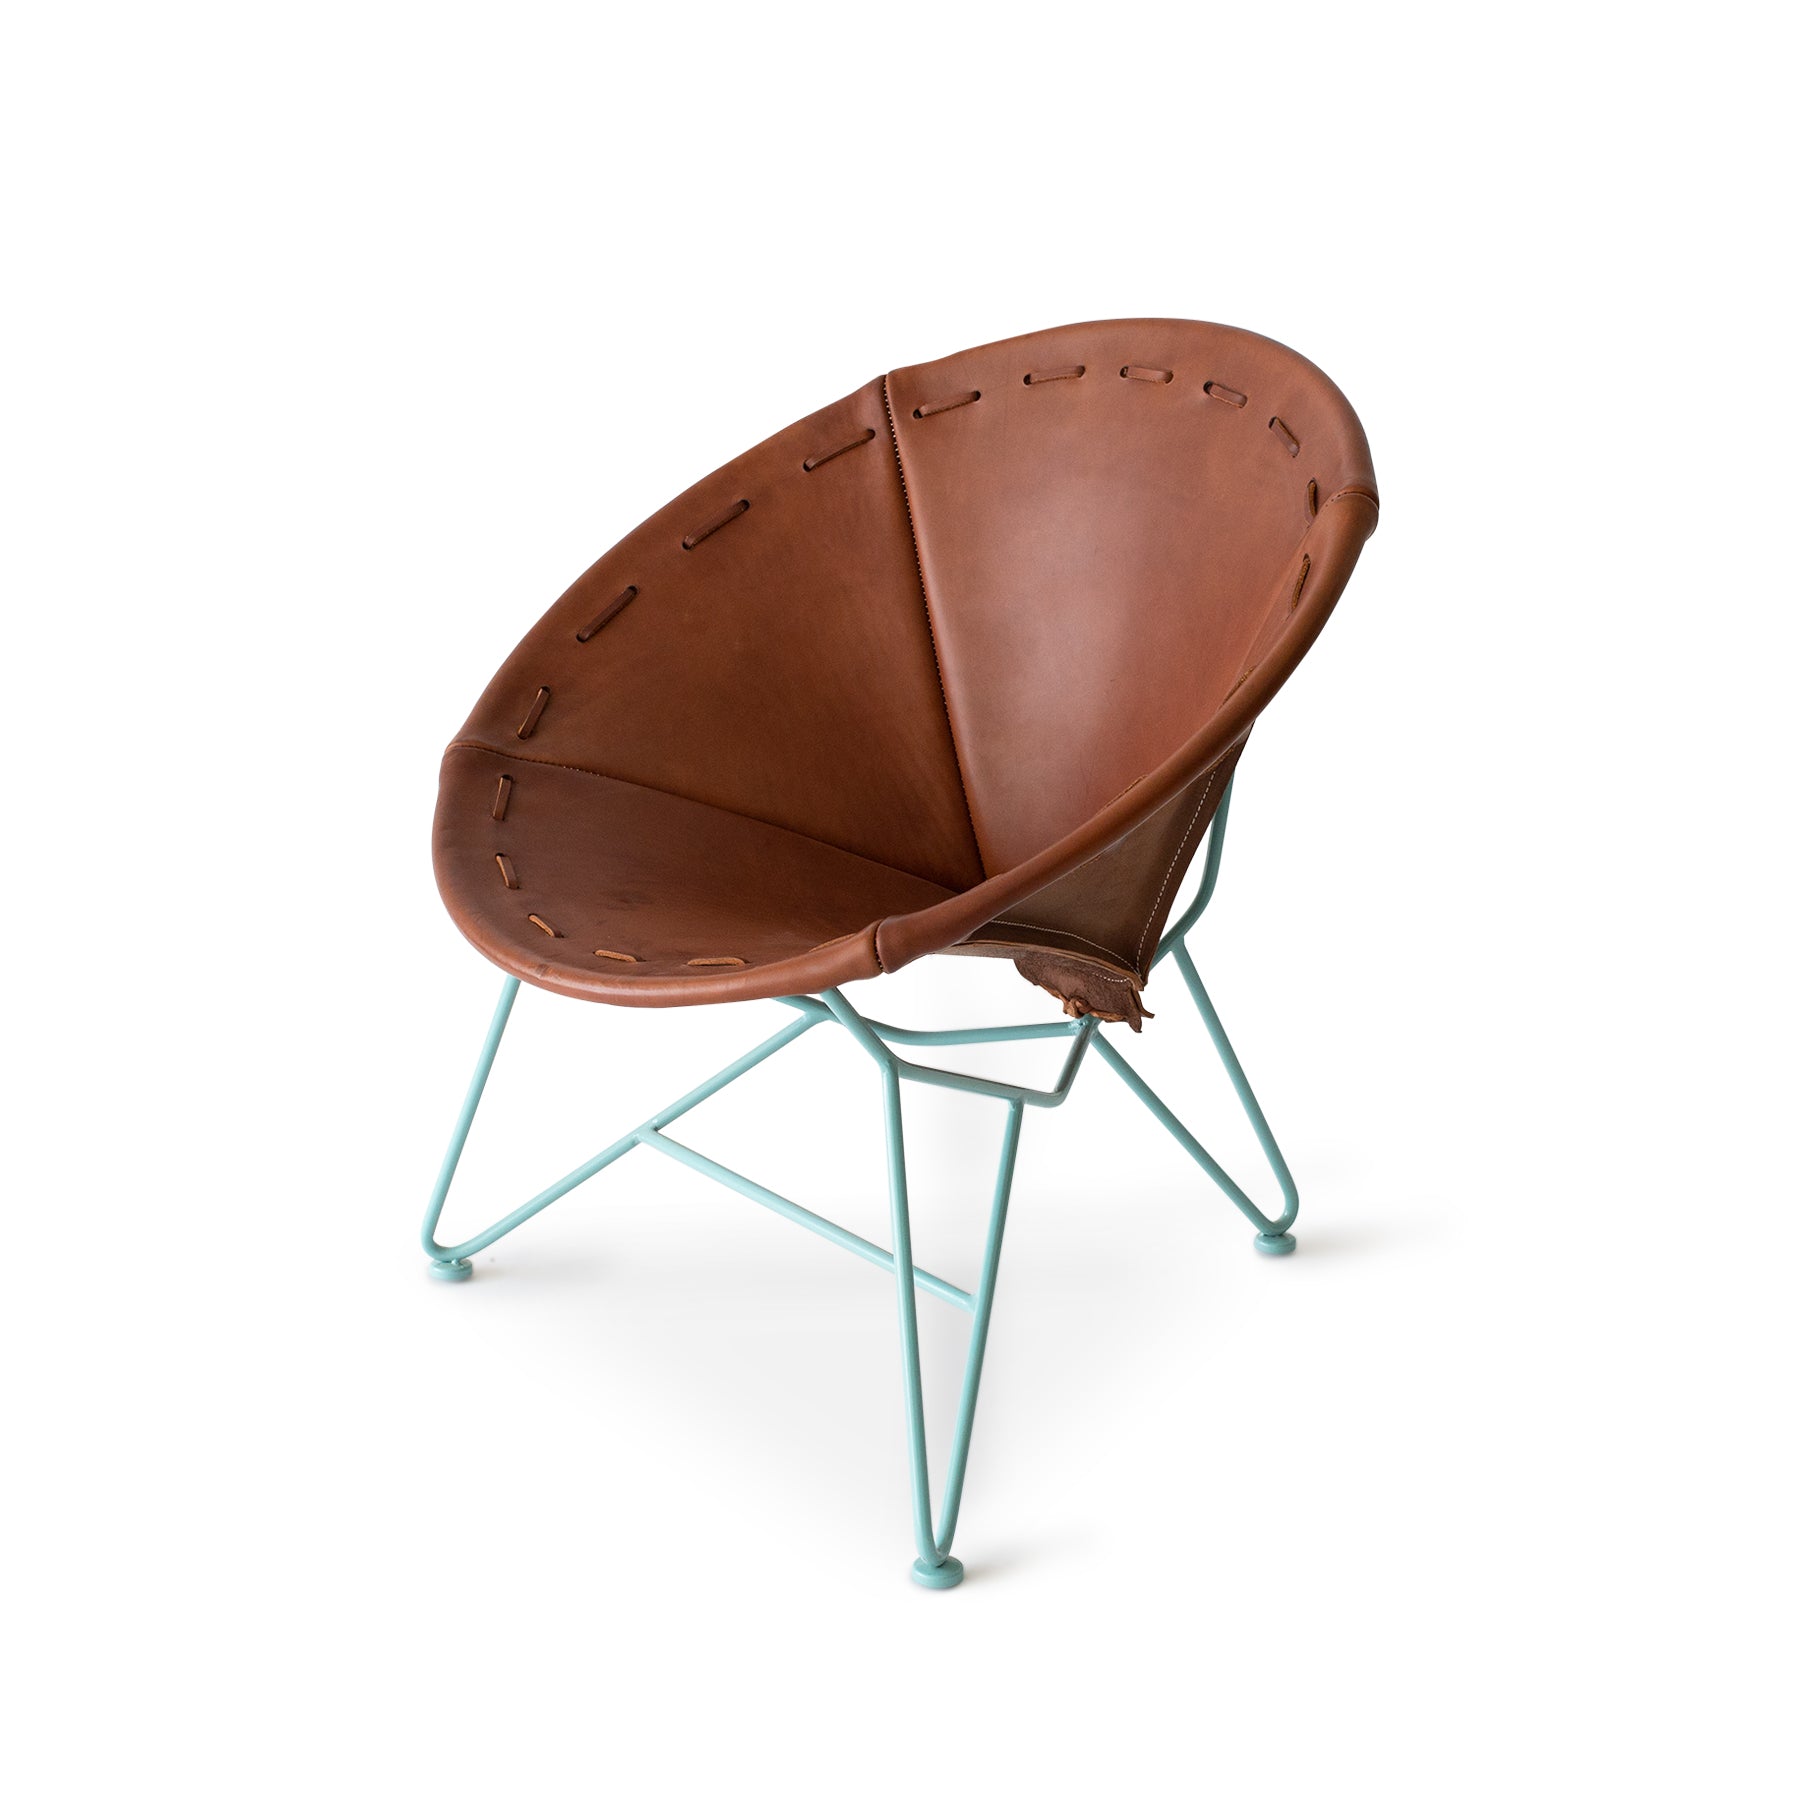 Saddle Leather Round Chair in Chocolate with Aqua Base Zoom Image 1